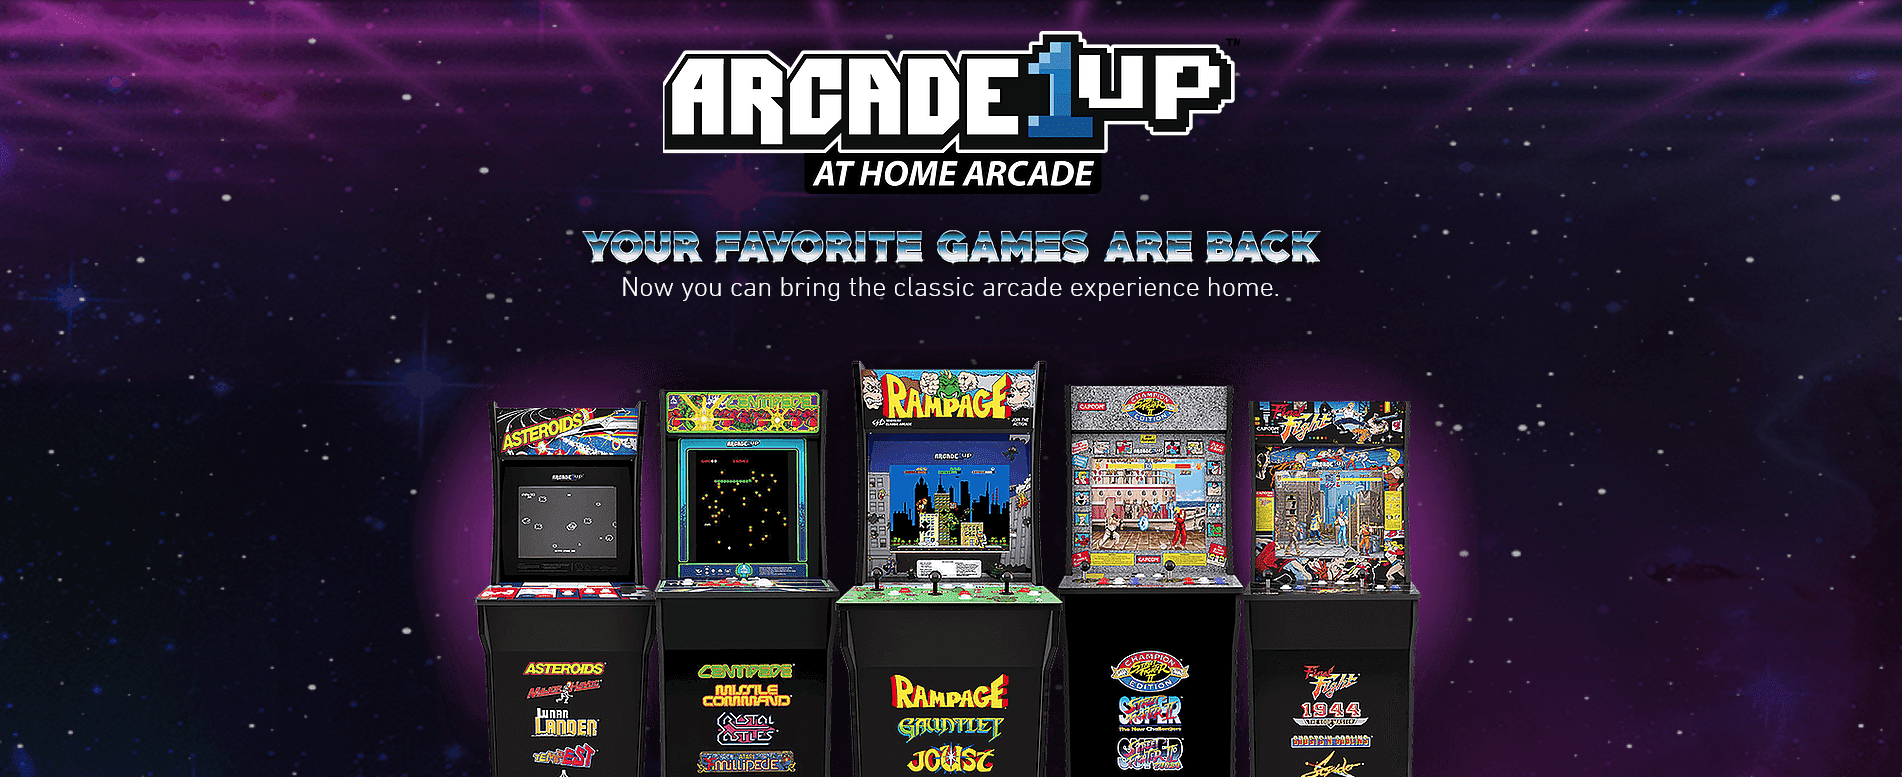 Street Fighter II, Centipede, And Rampage Get The Small Arcade Cabinet Treatment